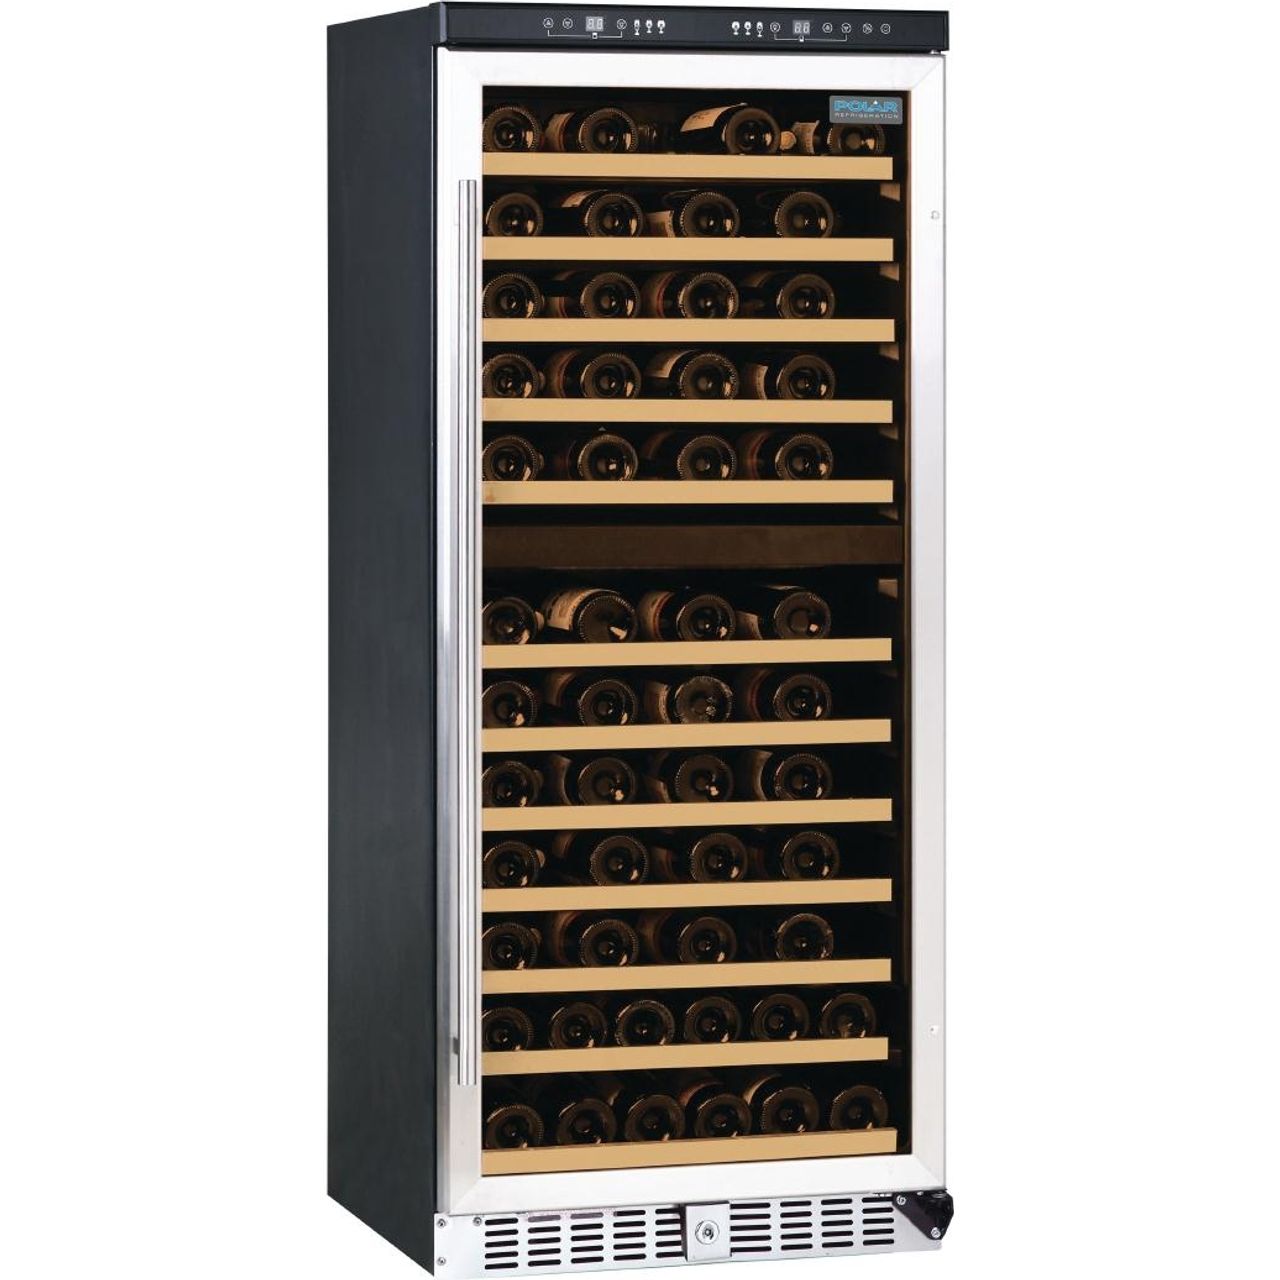 Polar Dual Zone CE217 Commercial Wine Cooler Review